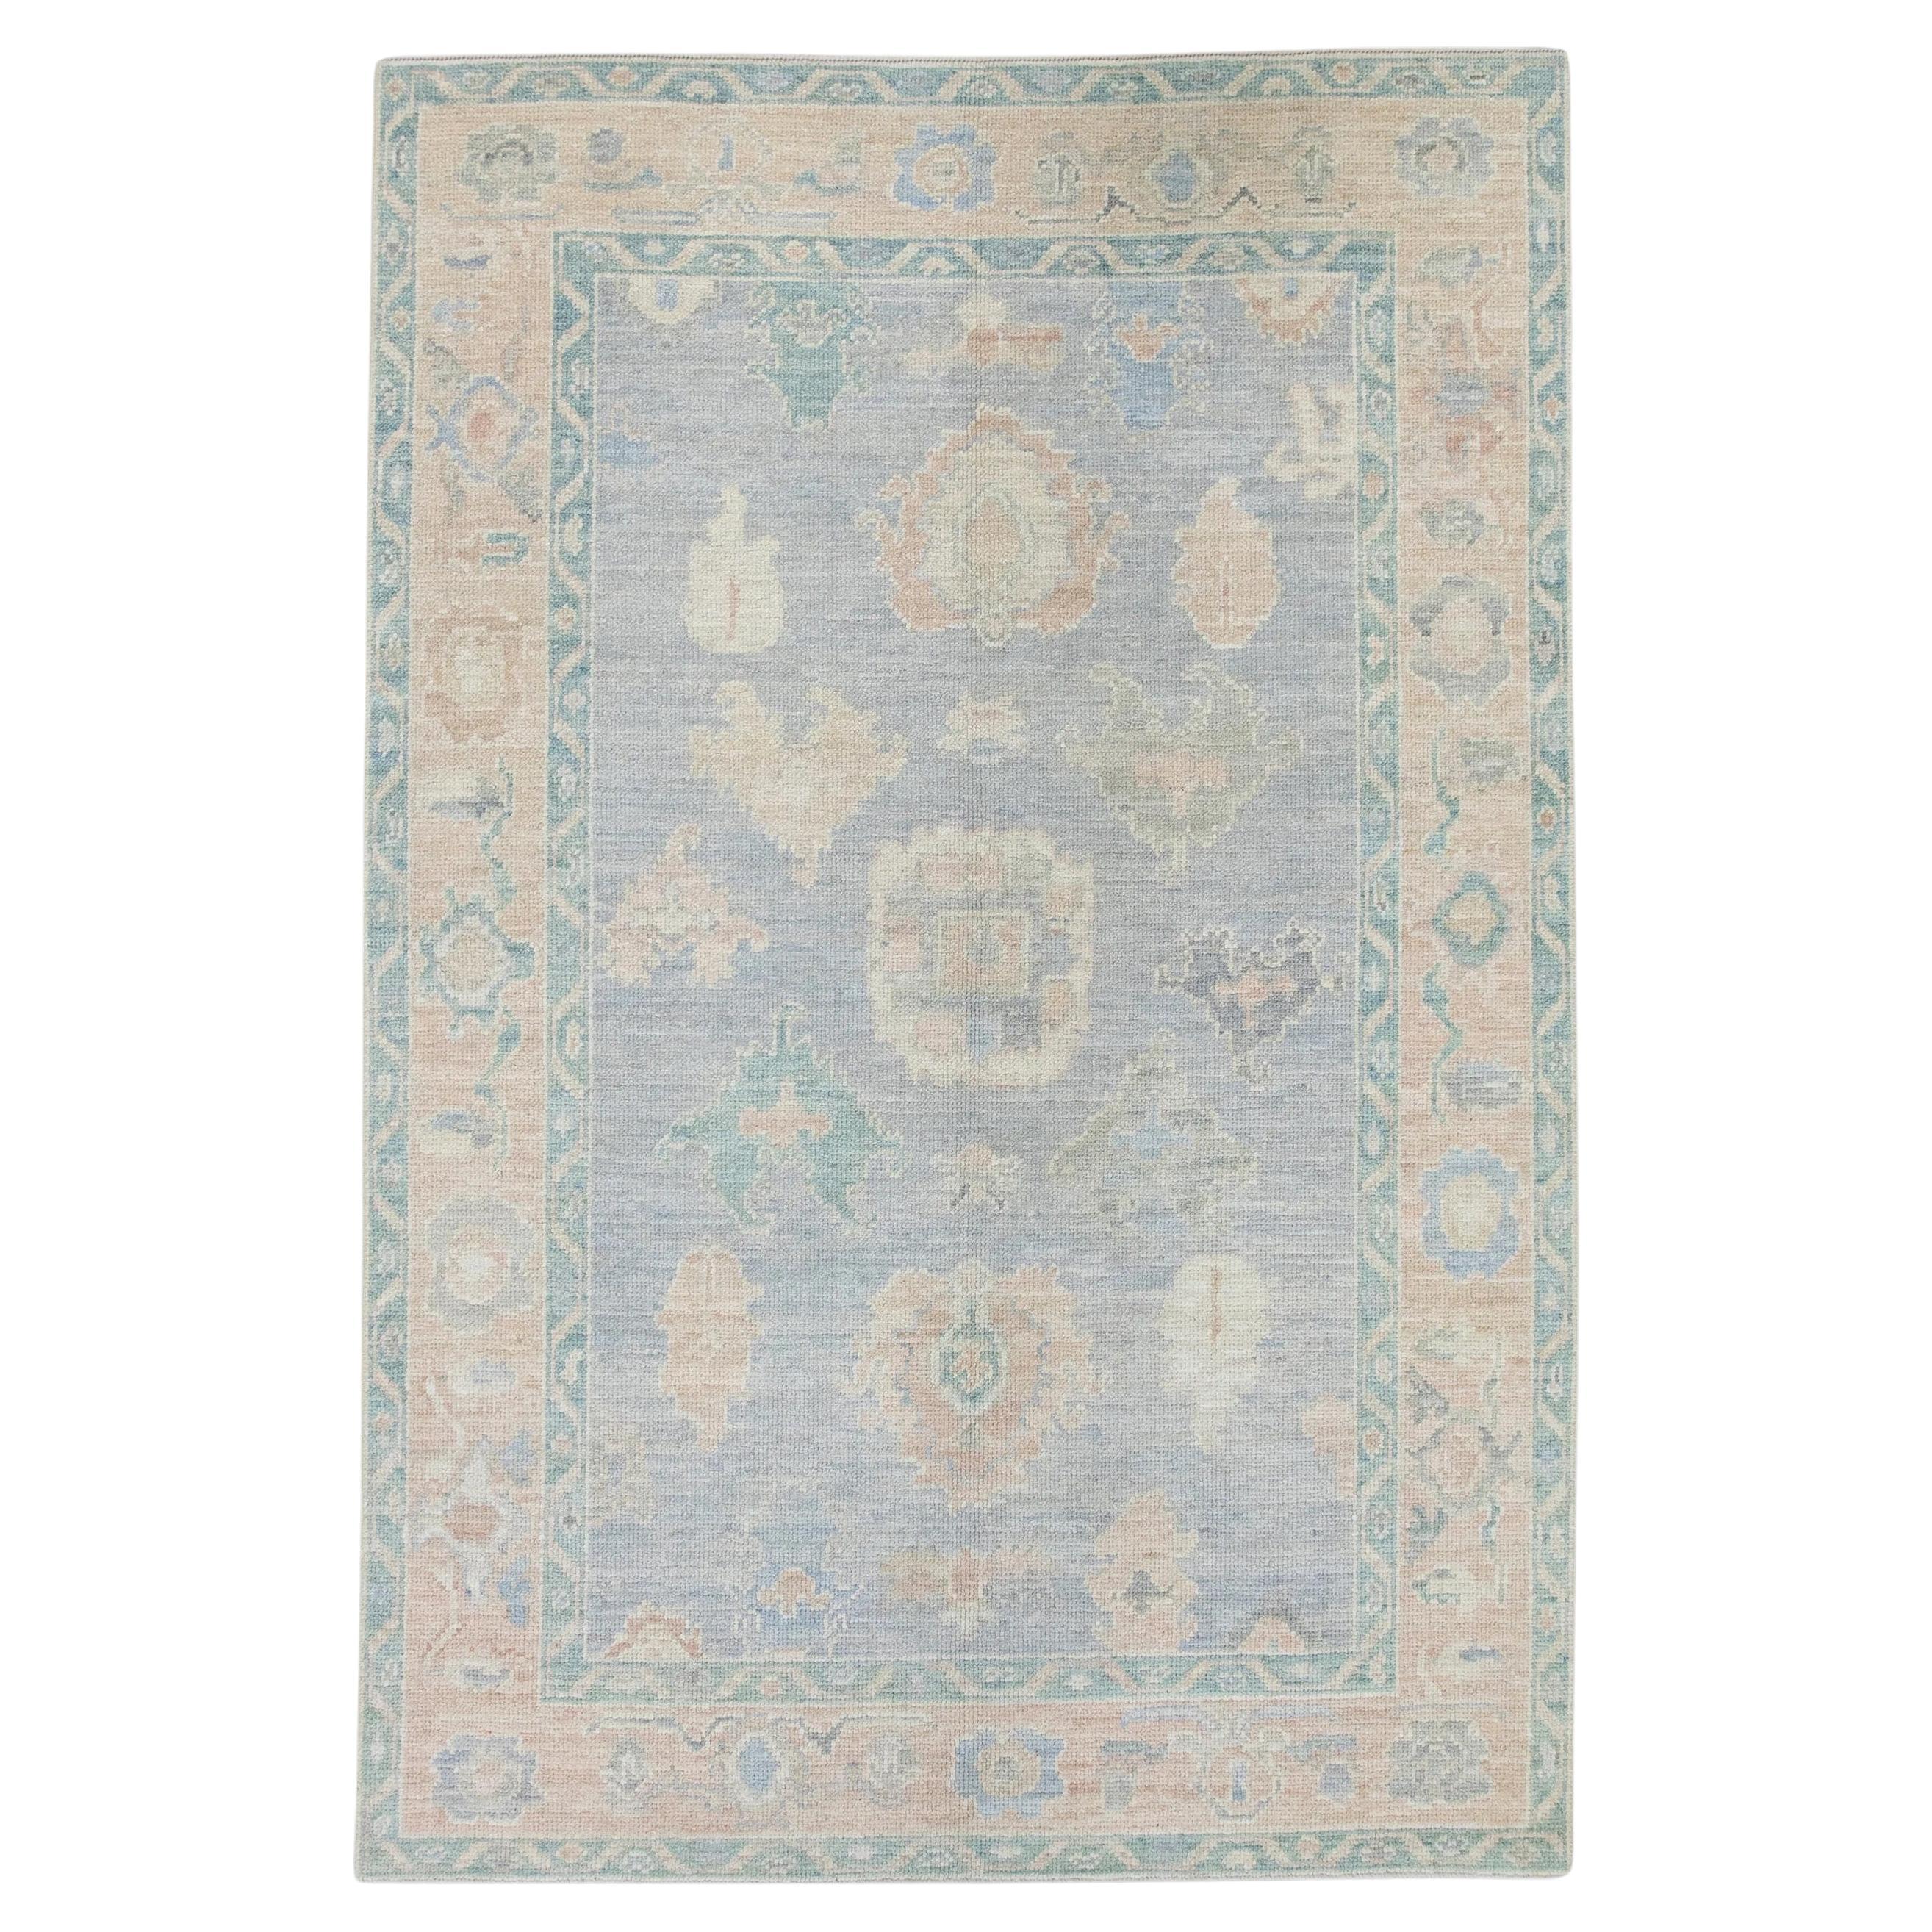 Blue Floral Handwoven Wool Turkish Oushak Rug 4'11" x 7'1" For Sale